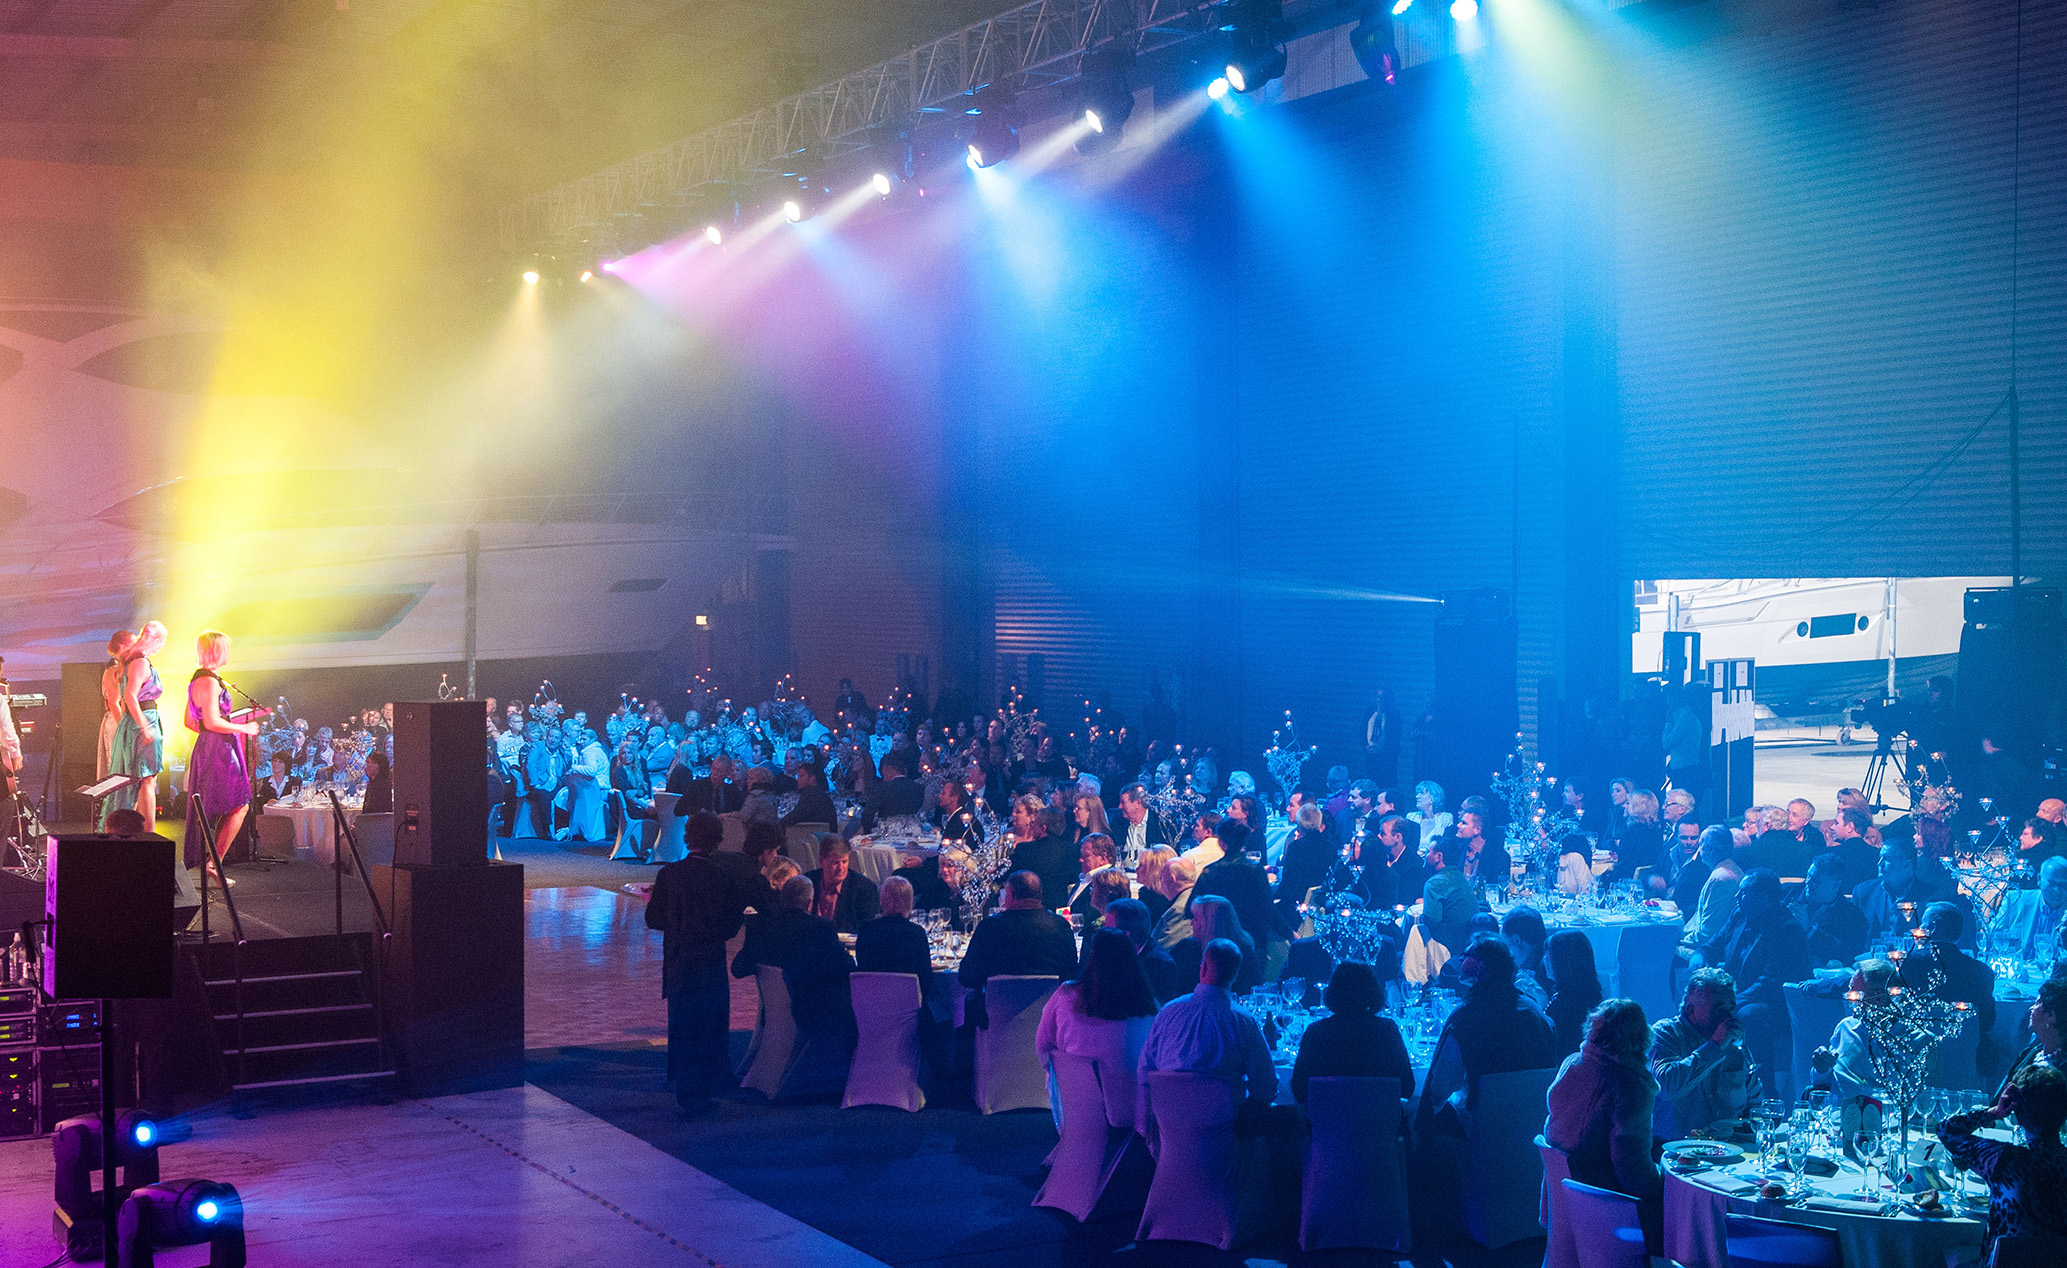 The gala dinner is one of the highlights of the four day Riviera ...